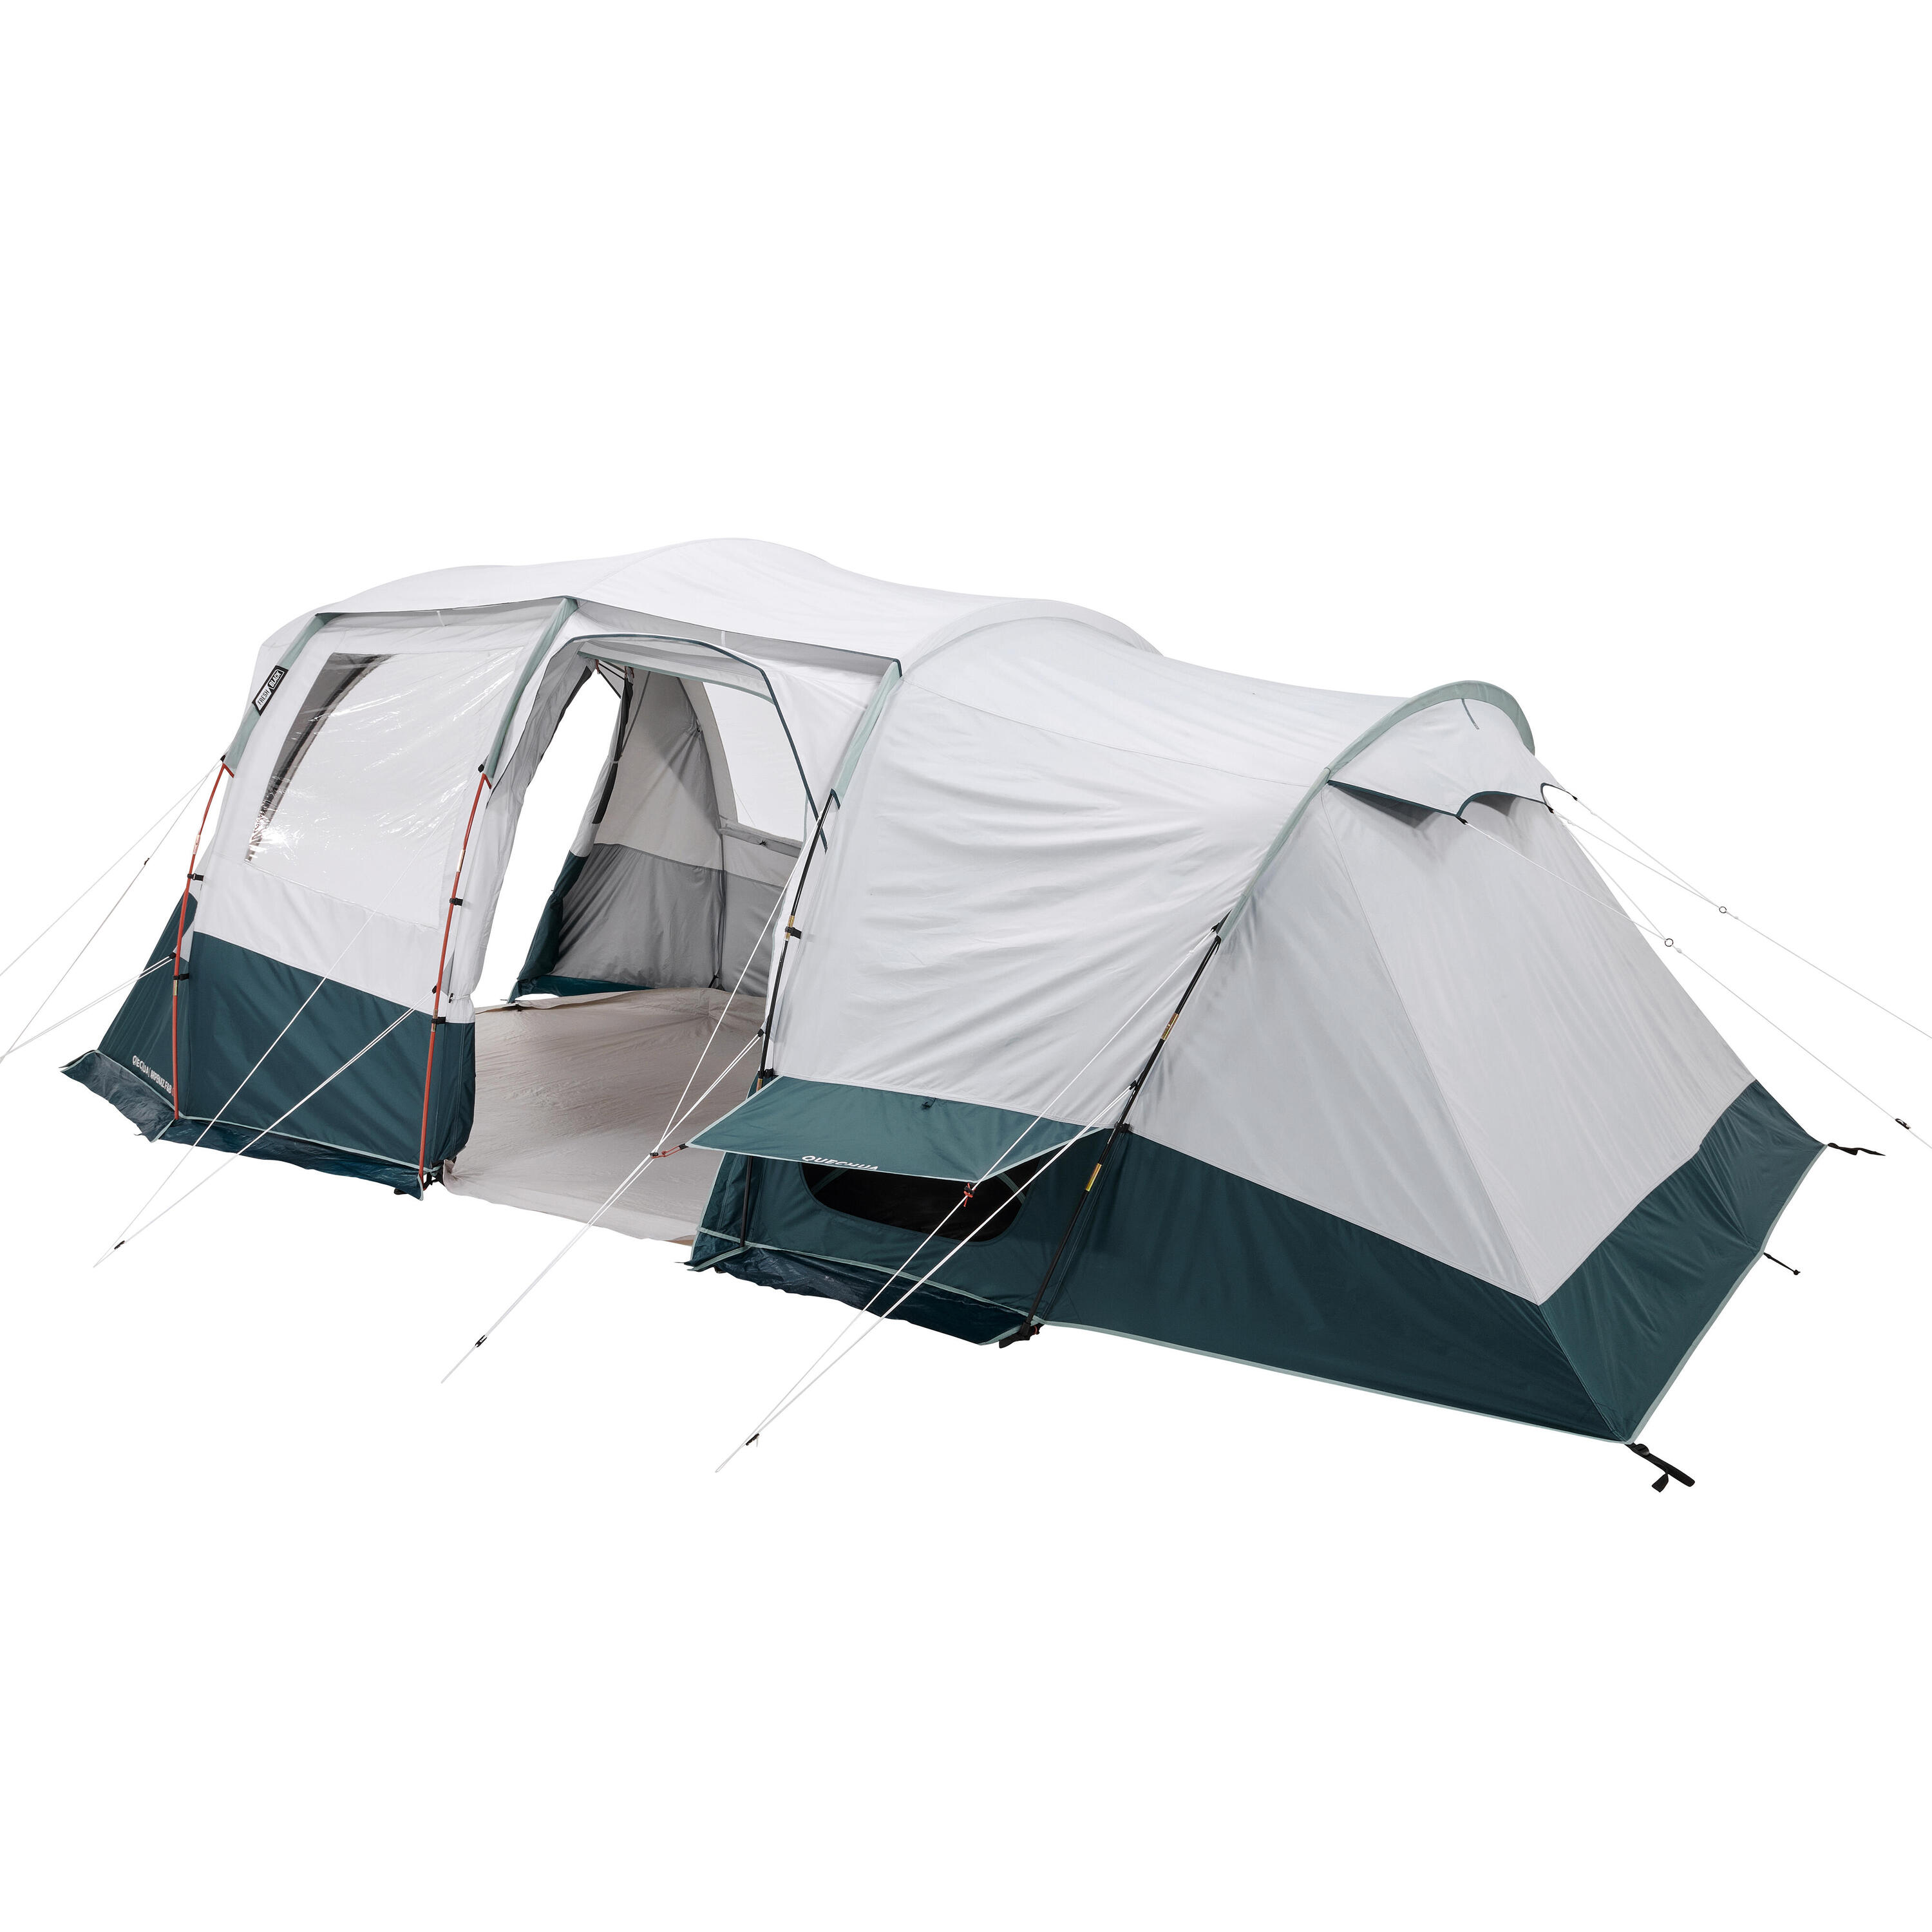 Camping tent with poles - Arpenaz 6.3 F&B - 6 Person - 3 Bedrooms 9/35